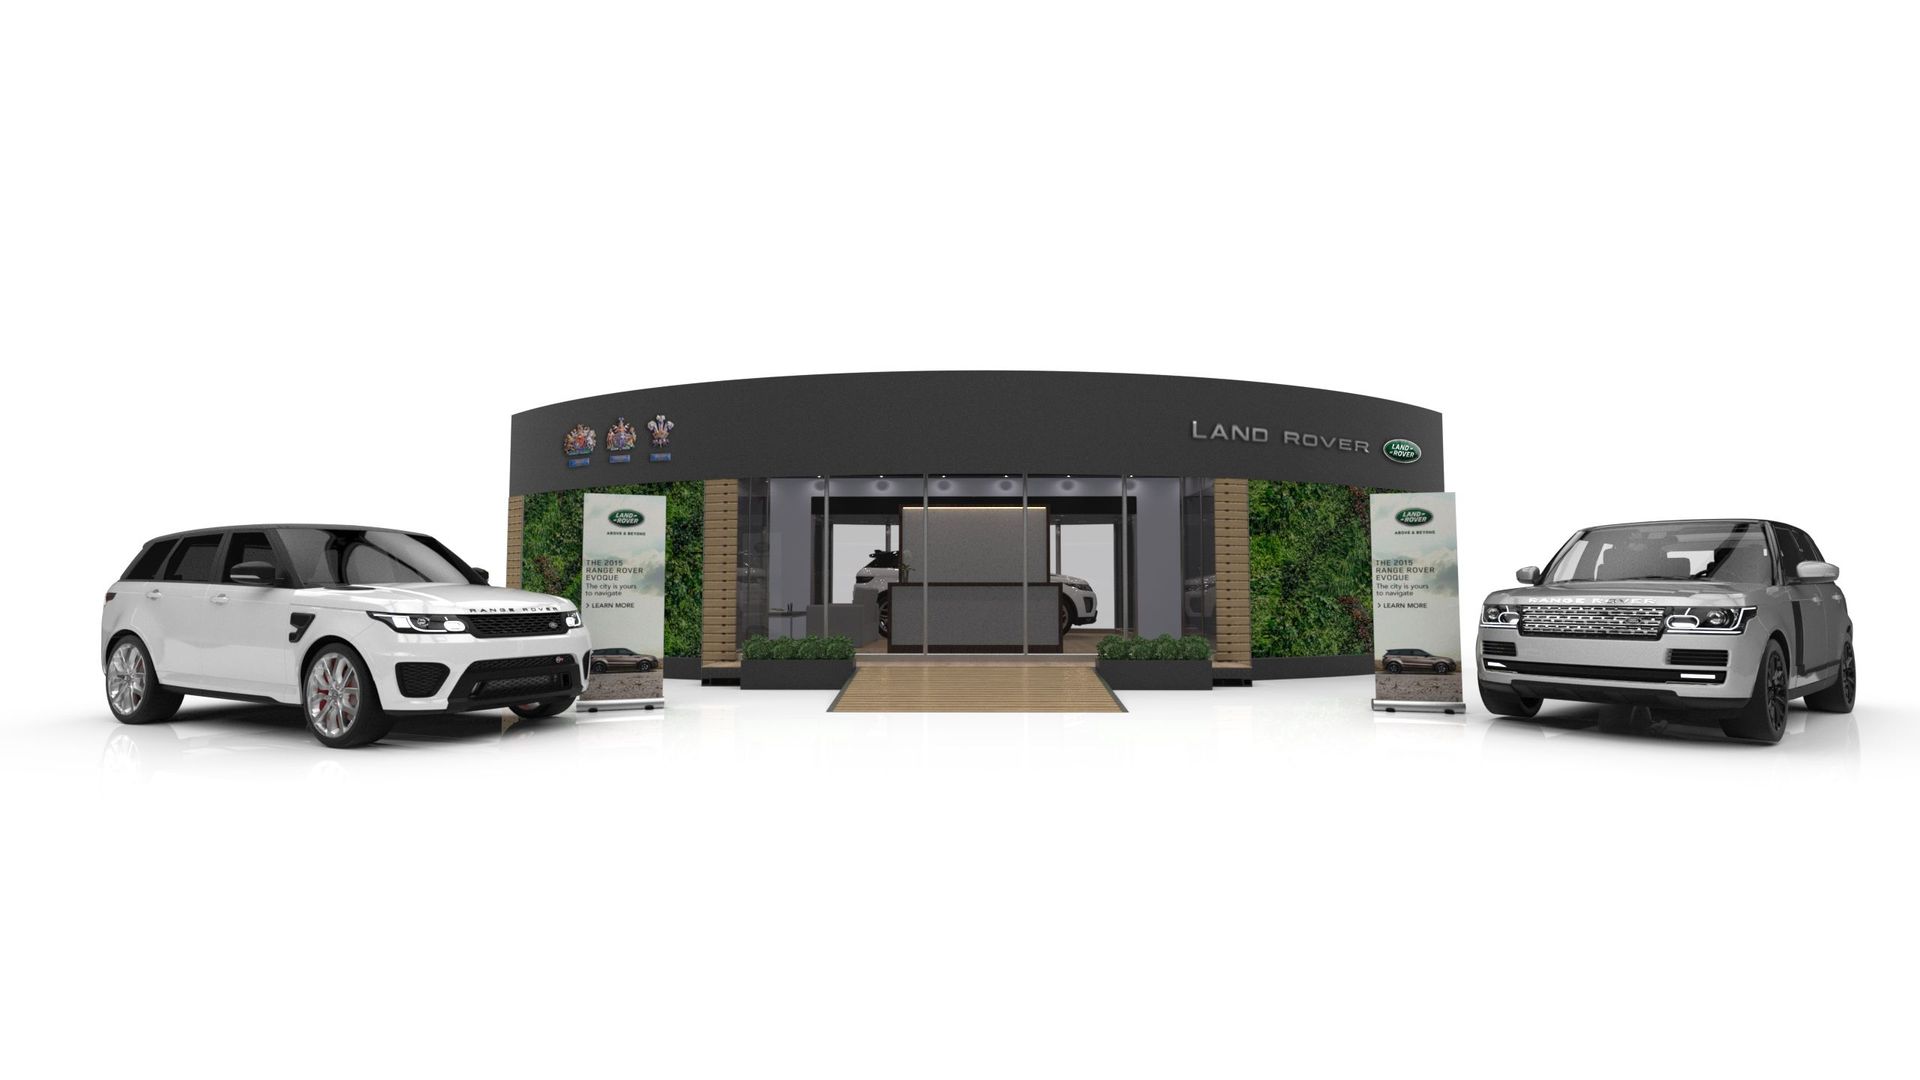 Land Rover curved event design